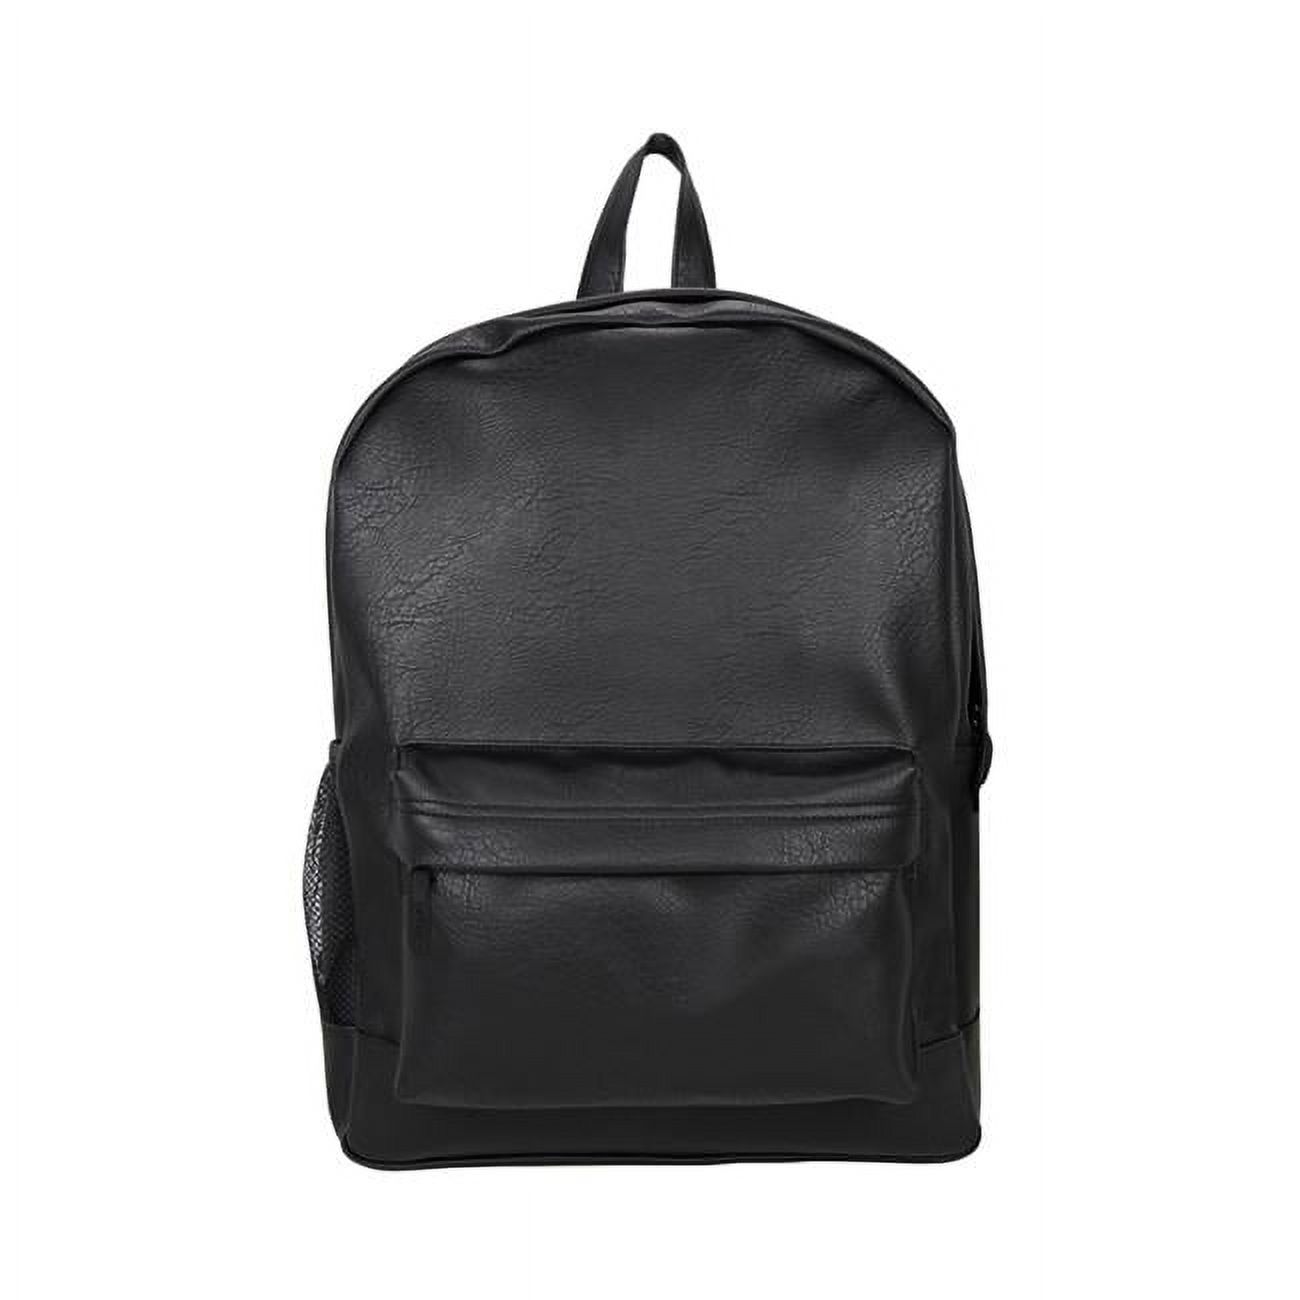 Vegan Leather Computer Backpack - image 1 of 3